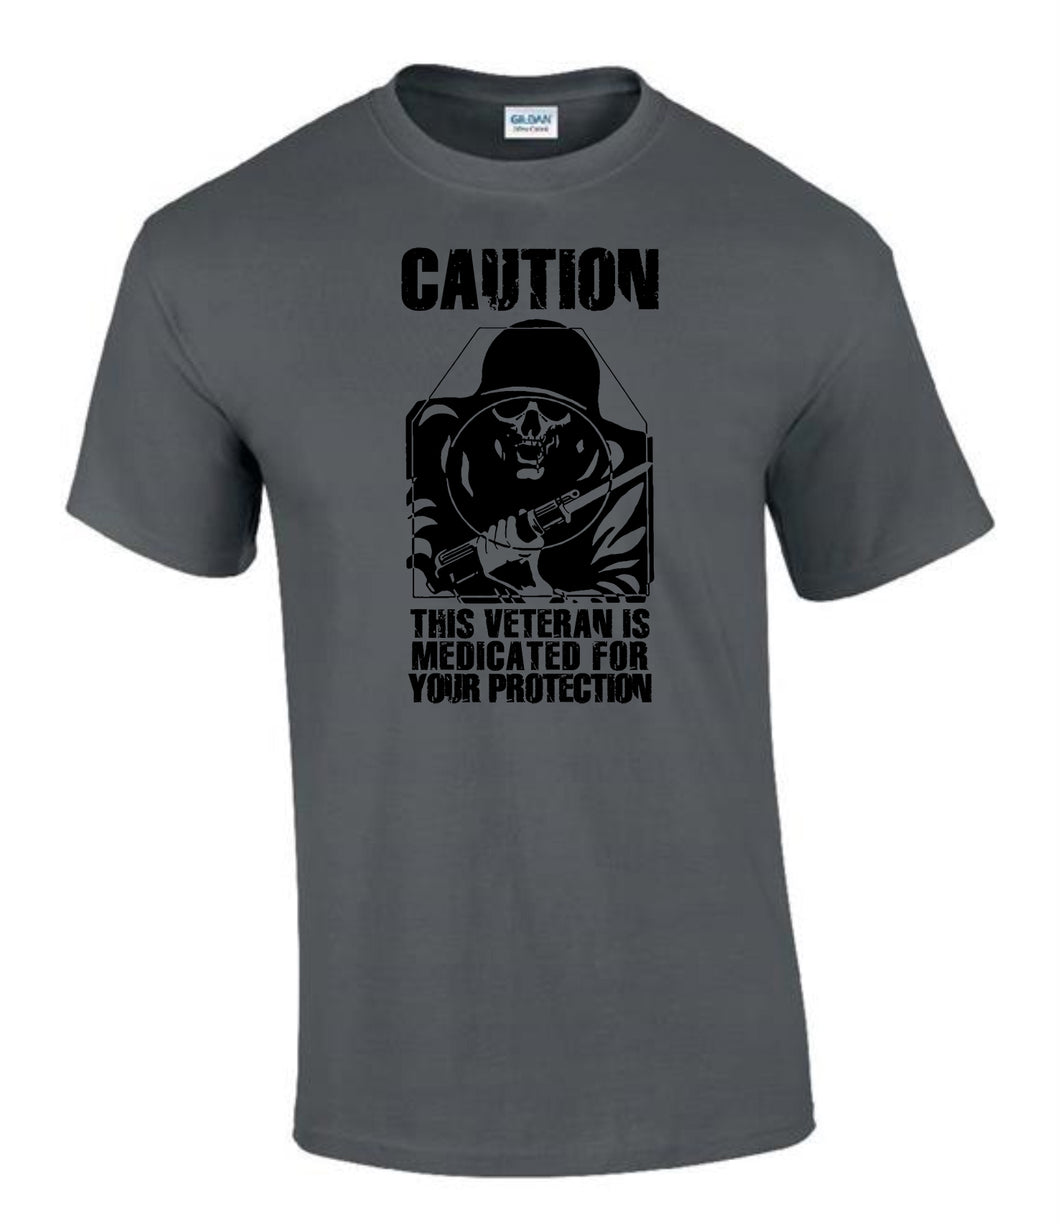 Caution - Medicated Veteran - British Humour T-Shirts - British Gifts - Dad Gifts - Grandad Gifts - Offended